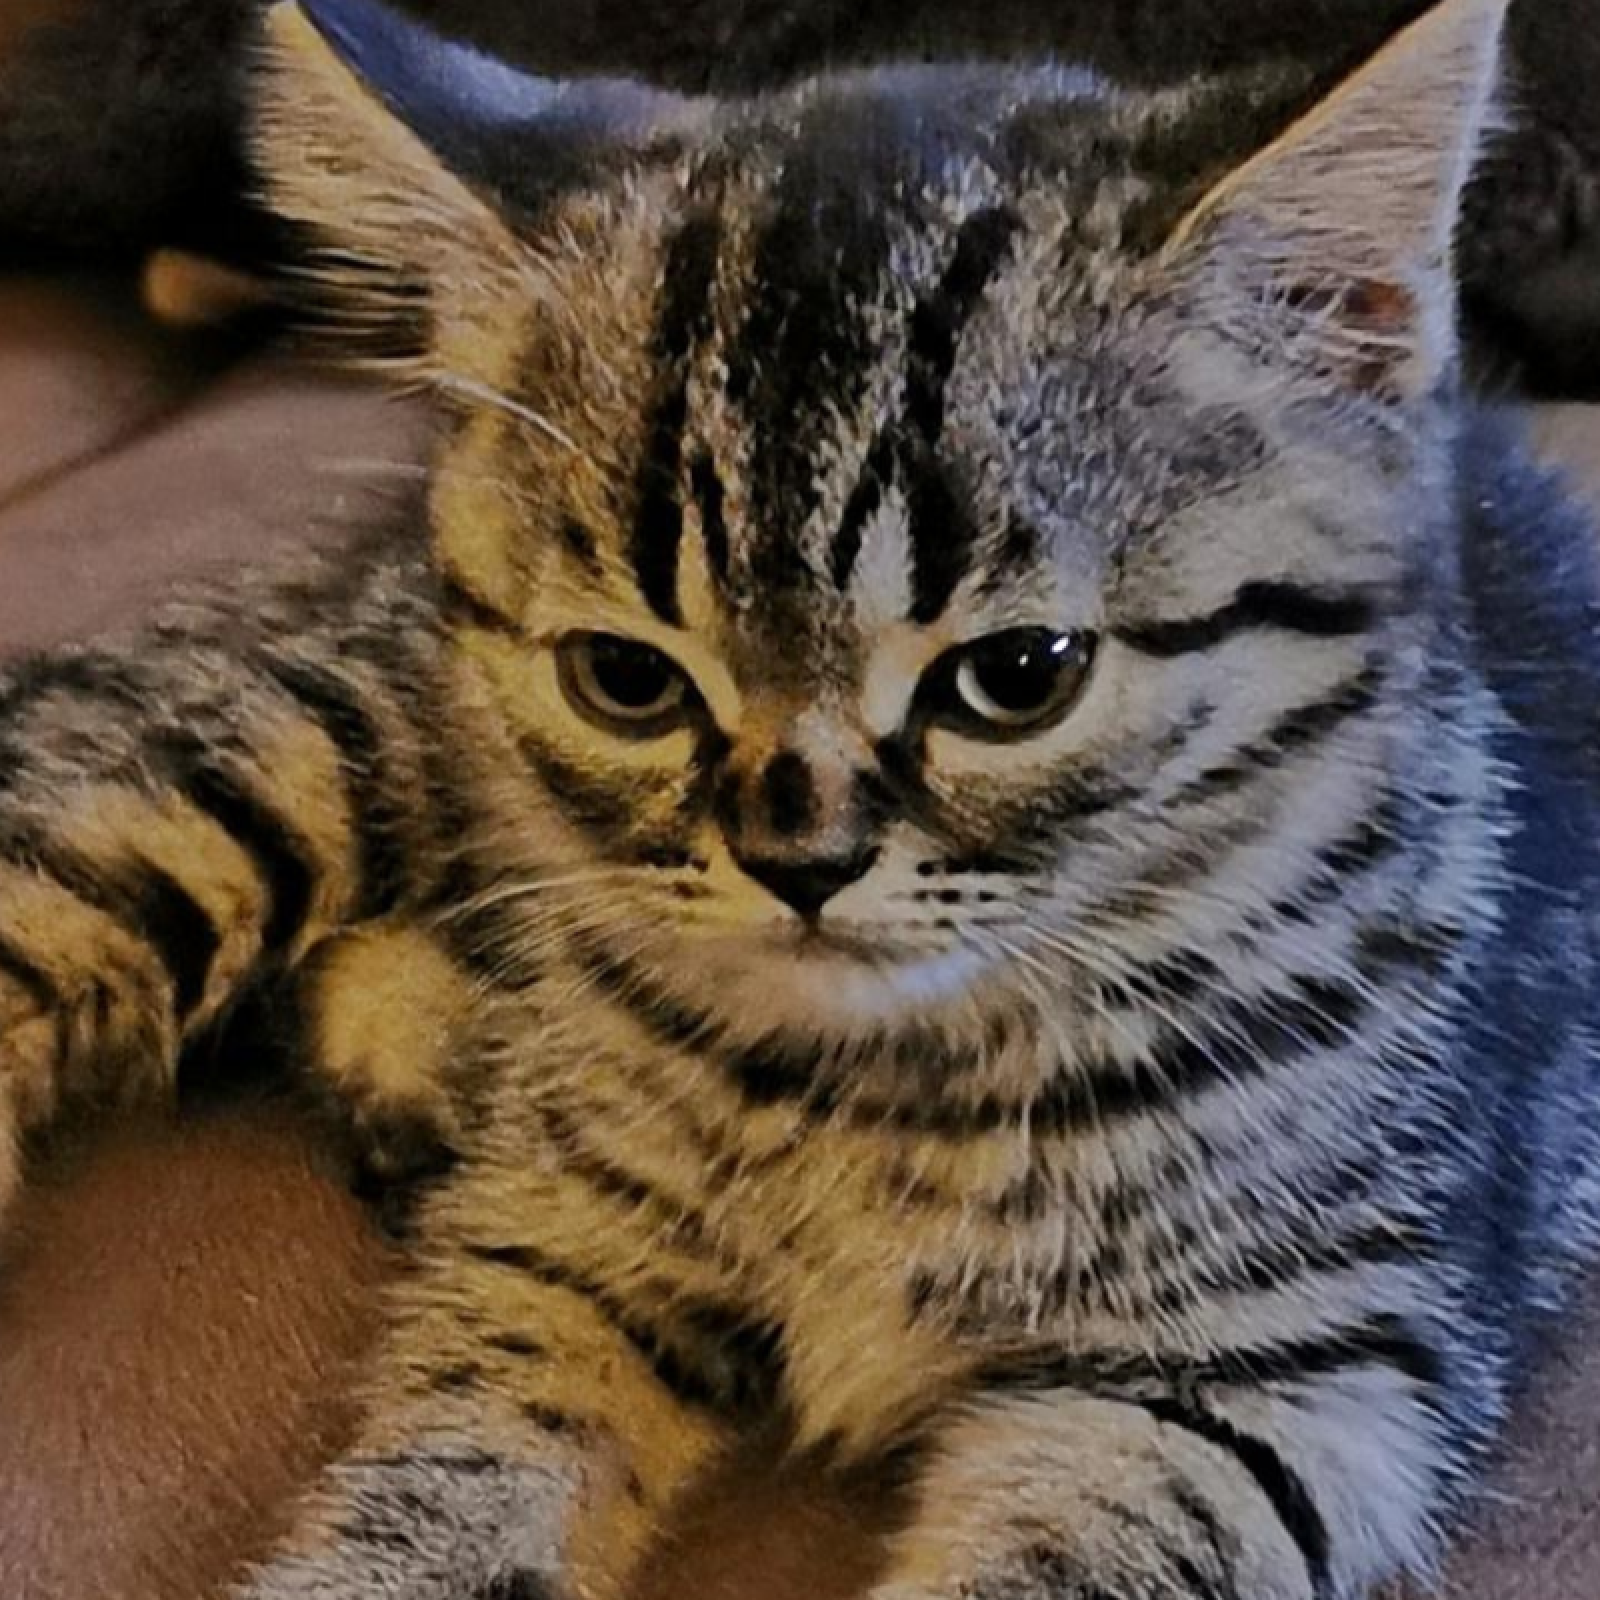 Kitten With Permanently Angry Face Dubbed 'Grumpy Cat 2.0'